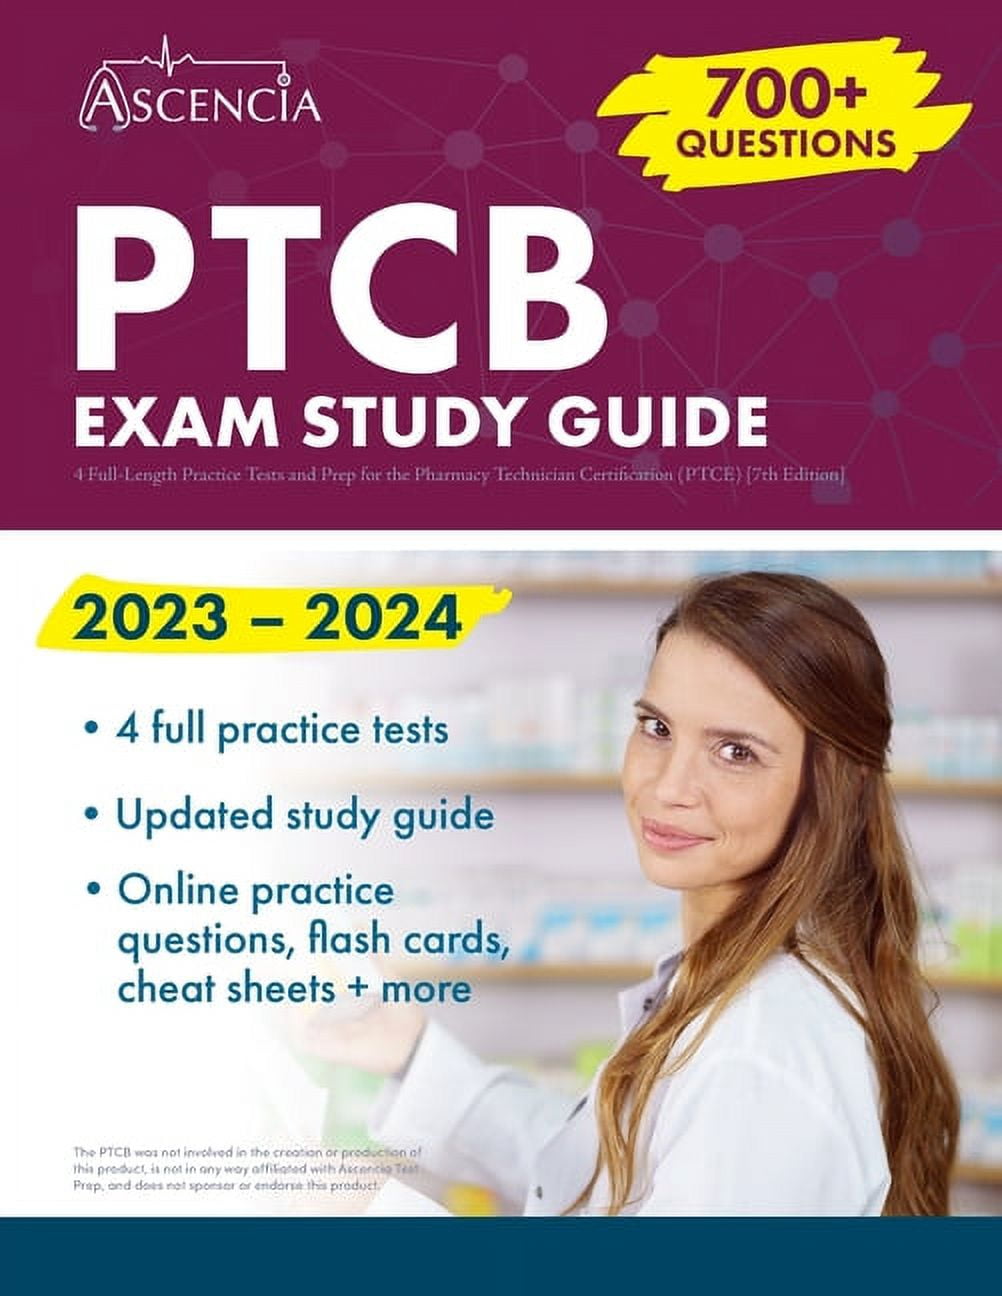 PTCB Exam Study Guide 2023-2024: 4 Full-Length Practice Tests and Prep for the Pharmacy Technician Certification (PTCE) [7th Edition] [Book]